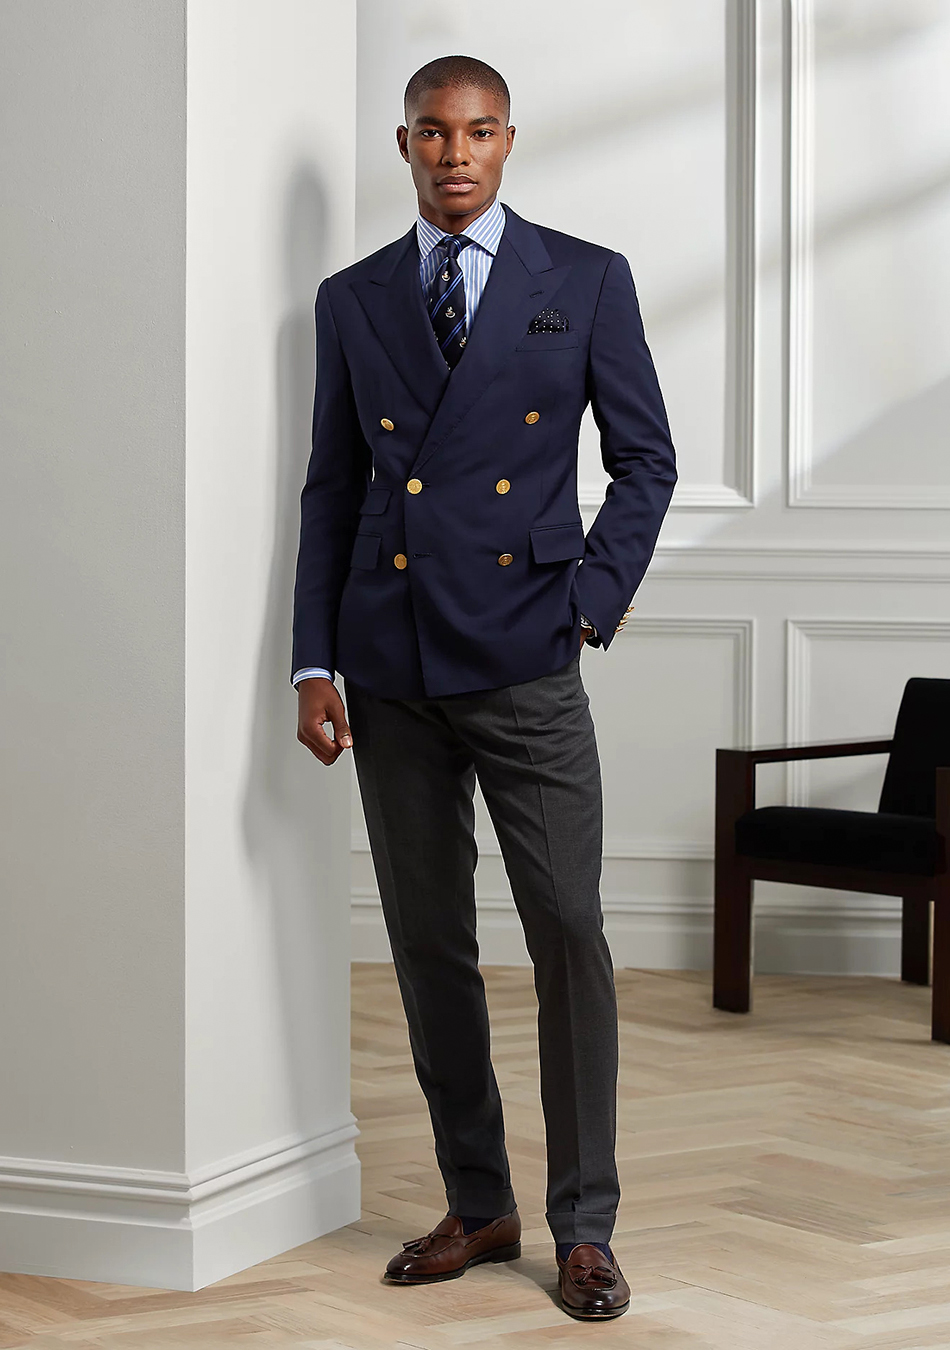 Navy double-breasted blazer with charcoal pants and brown loafers